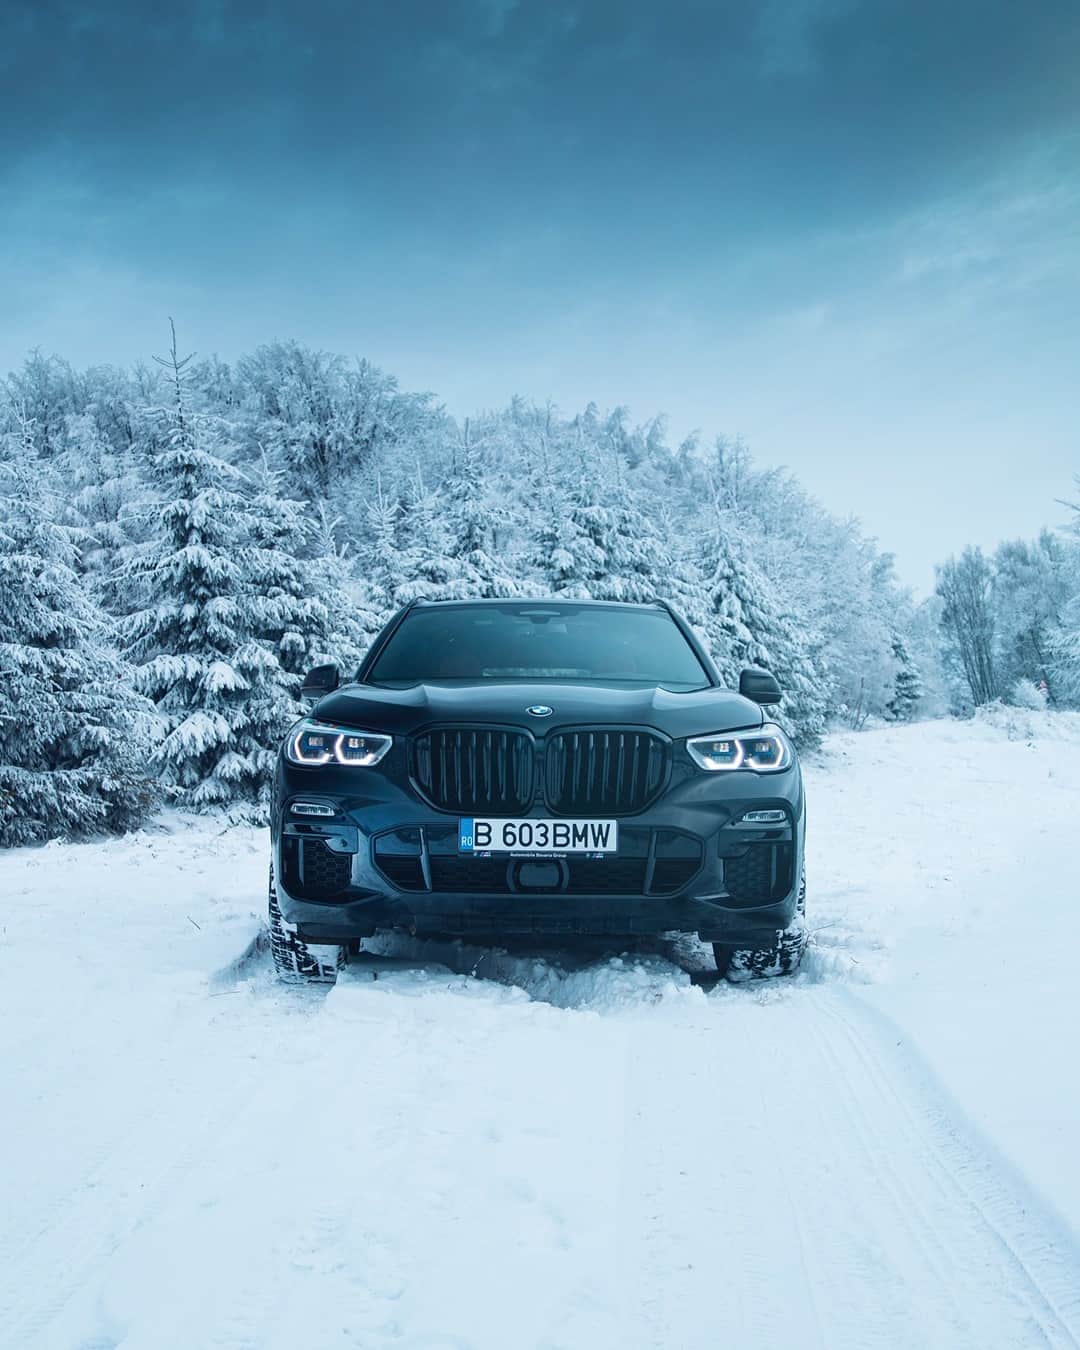 BMWのインスタグラム：「Winter bucket list. The BMW X5. #TheX5 #BMW #X5 #BMWrepost @ciprianmihai __ BMW X5 M50i: Fuel consumption weighted combined in l/100km: 10.9–10.5 (NEDC); 12.3–11.5 (WLTP), CO2 emissions weighted combined in g/km: 251–242 (NEDC); 281–263 (WLTP). Further information: www.bmw.com/disclaimer.   530 hp, 390 kW, 750 Nm, Acceleration (0-100 km/h): 4.3 s, Top speed (limited): 250 km/h.」